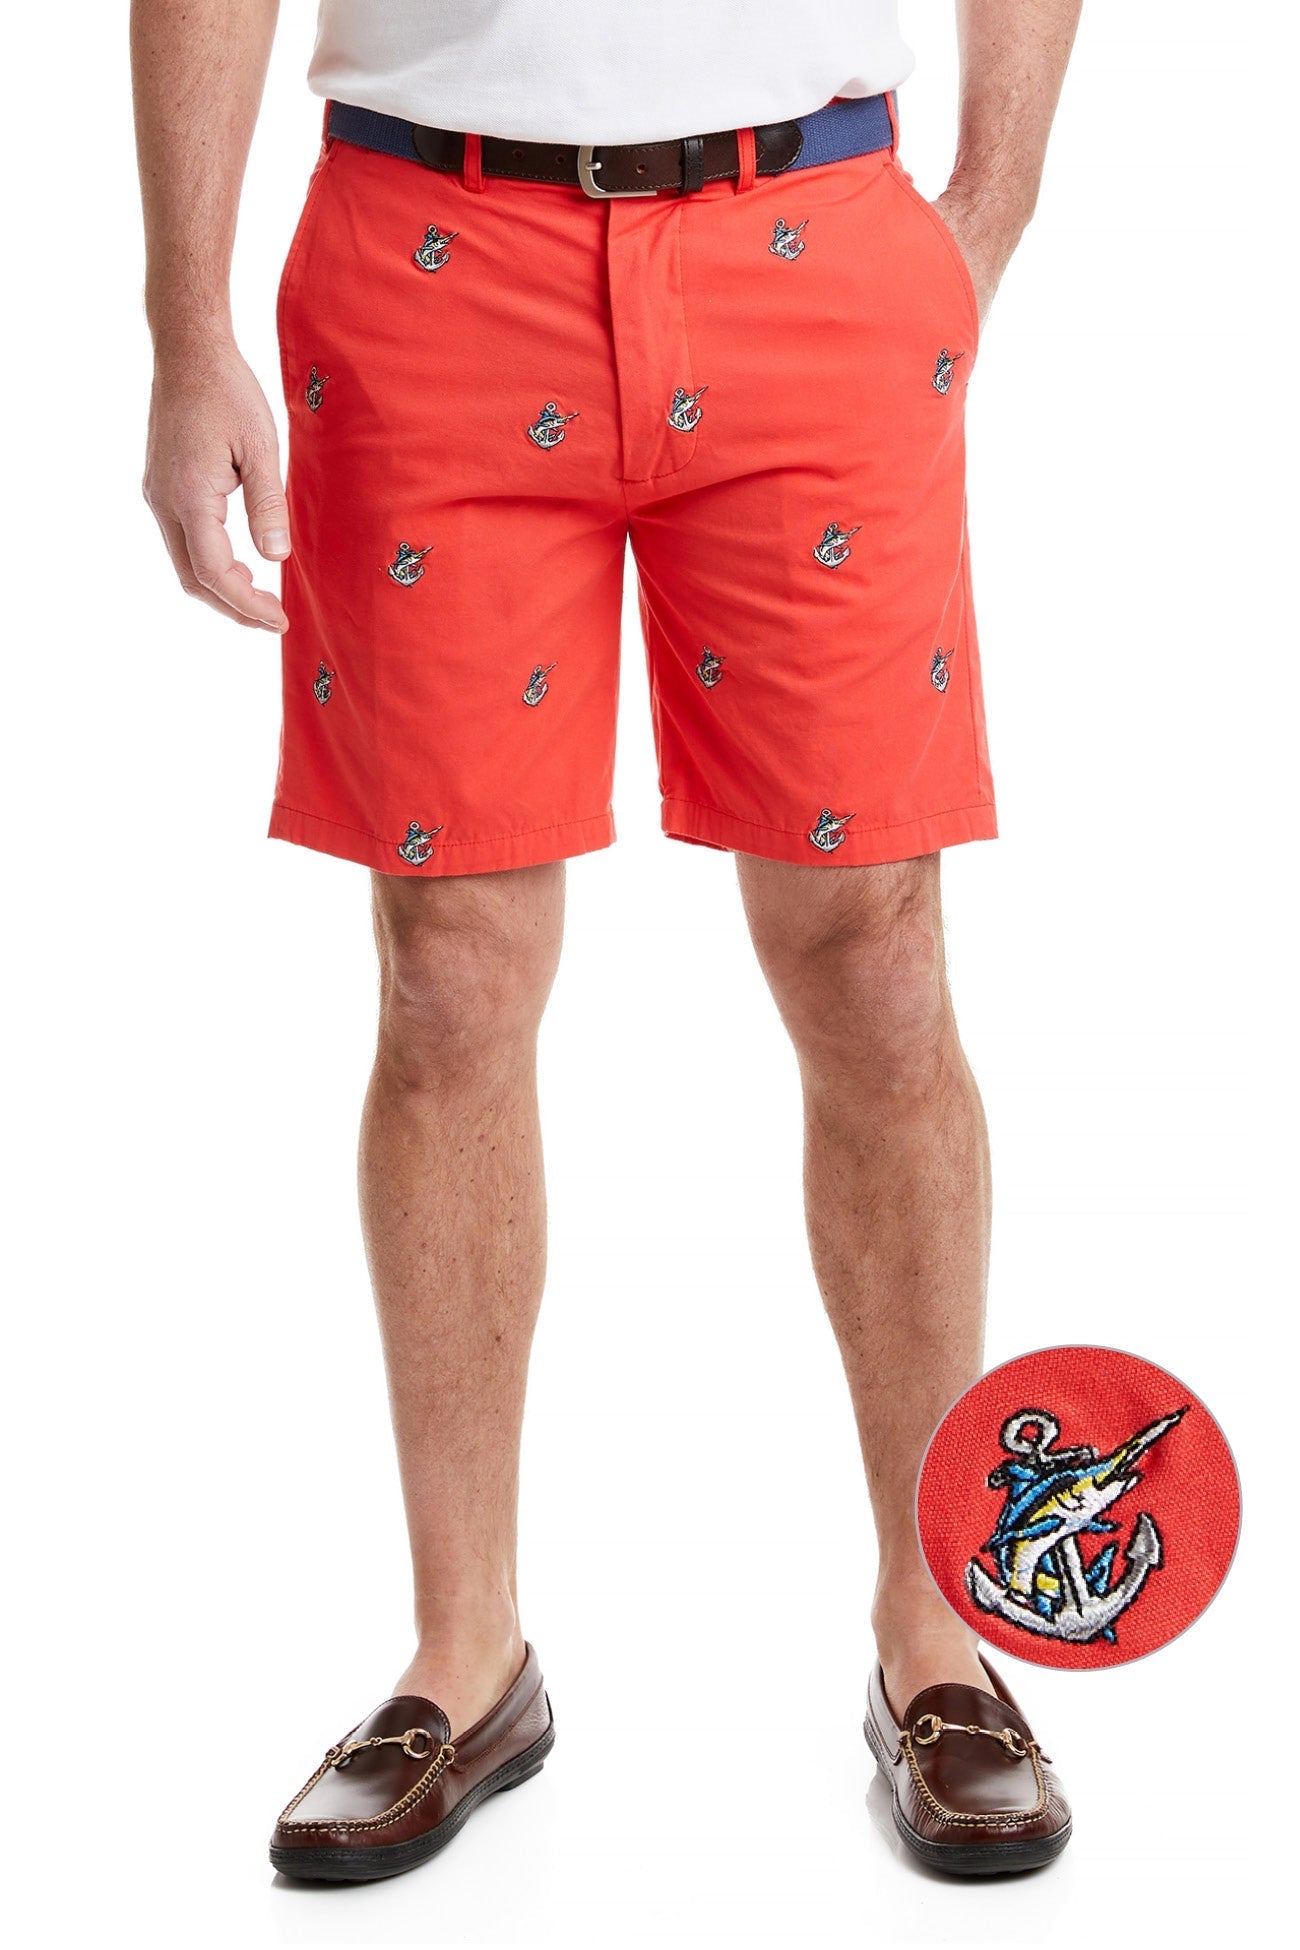 Island Short Canvas Washed Red with Anchor & Fish MENS EMBROIDERED SHORTS Castaway Nantucket Island